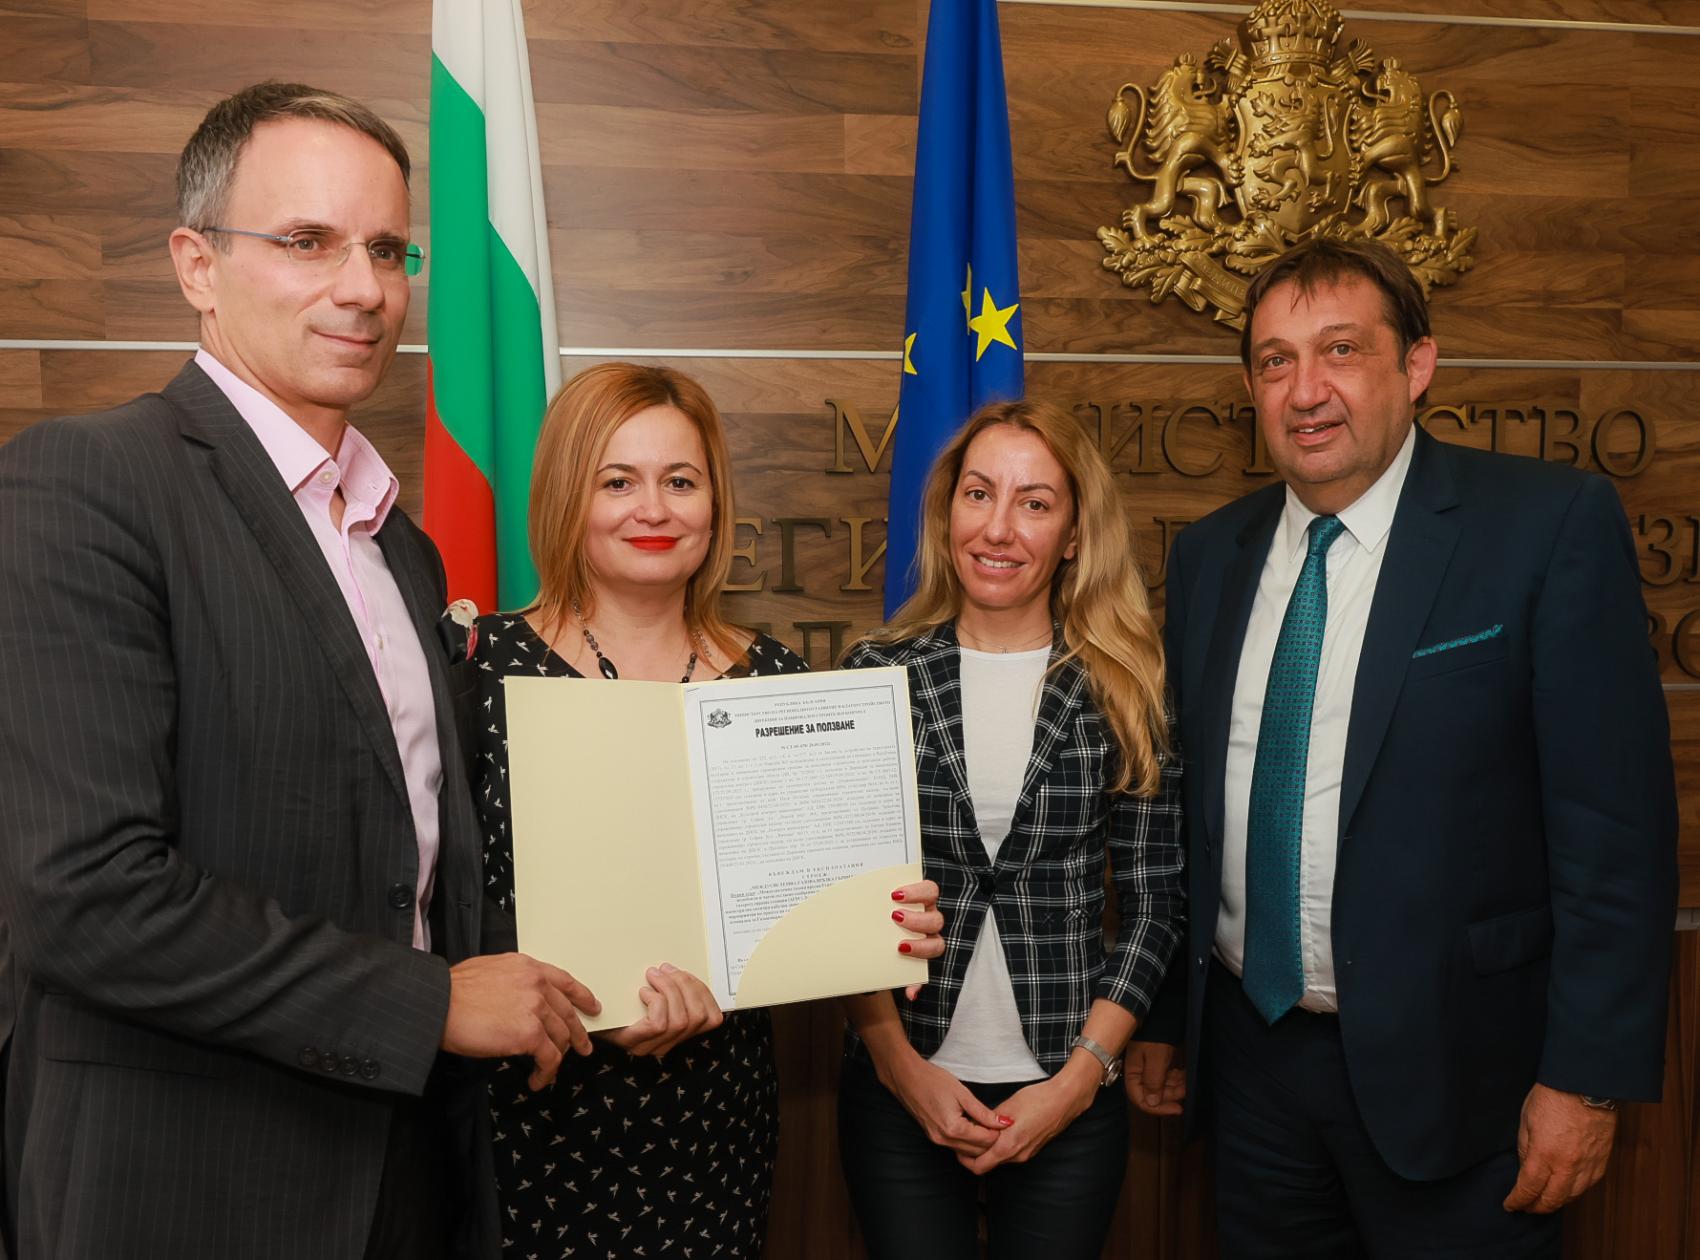 The intersystem gas connection Greece-Bulgaria has been issued a Permit